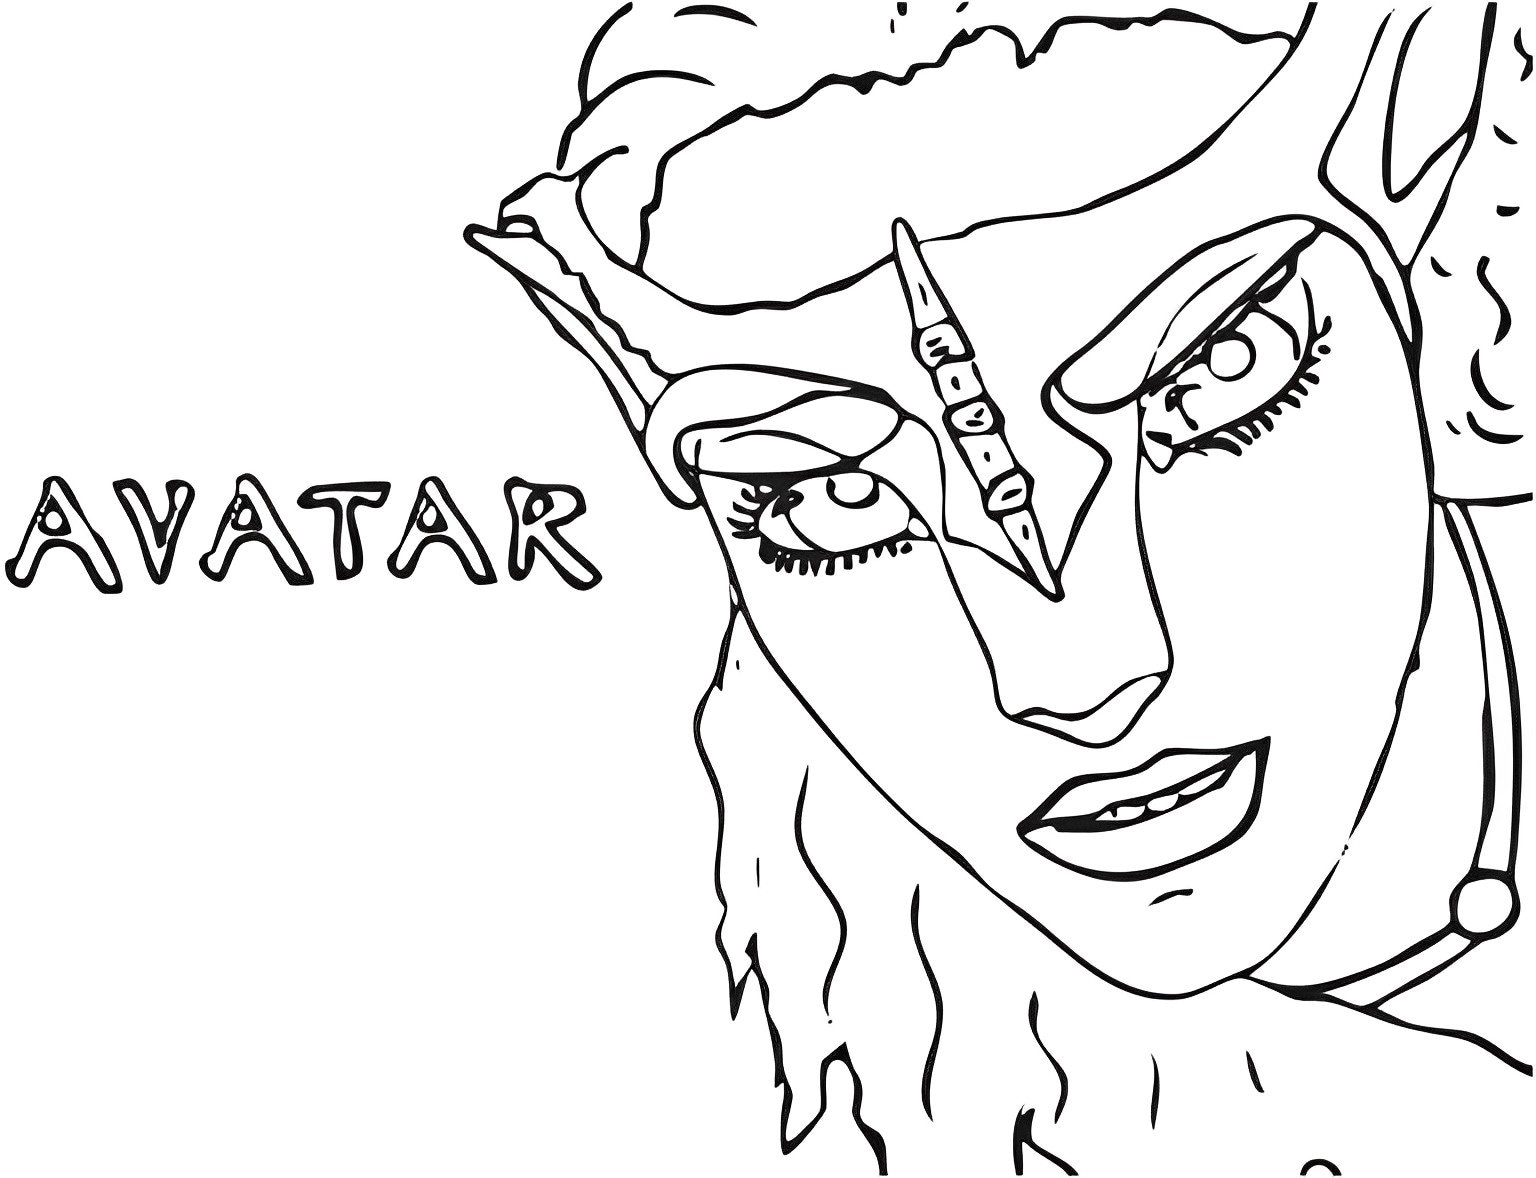 Coloring Books for Adults and Kids 2-4 4-8 8-12+ Ser.: Avatar